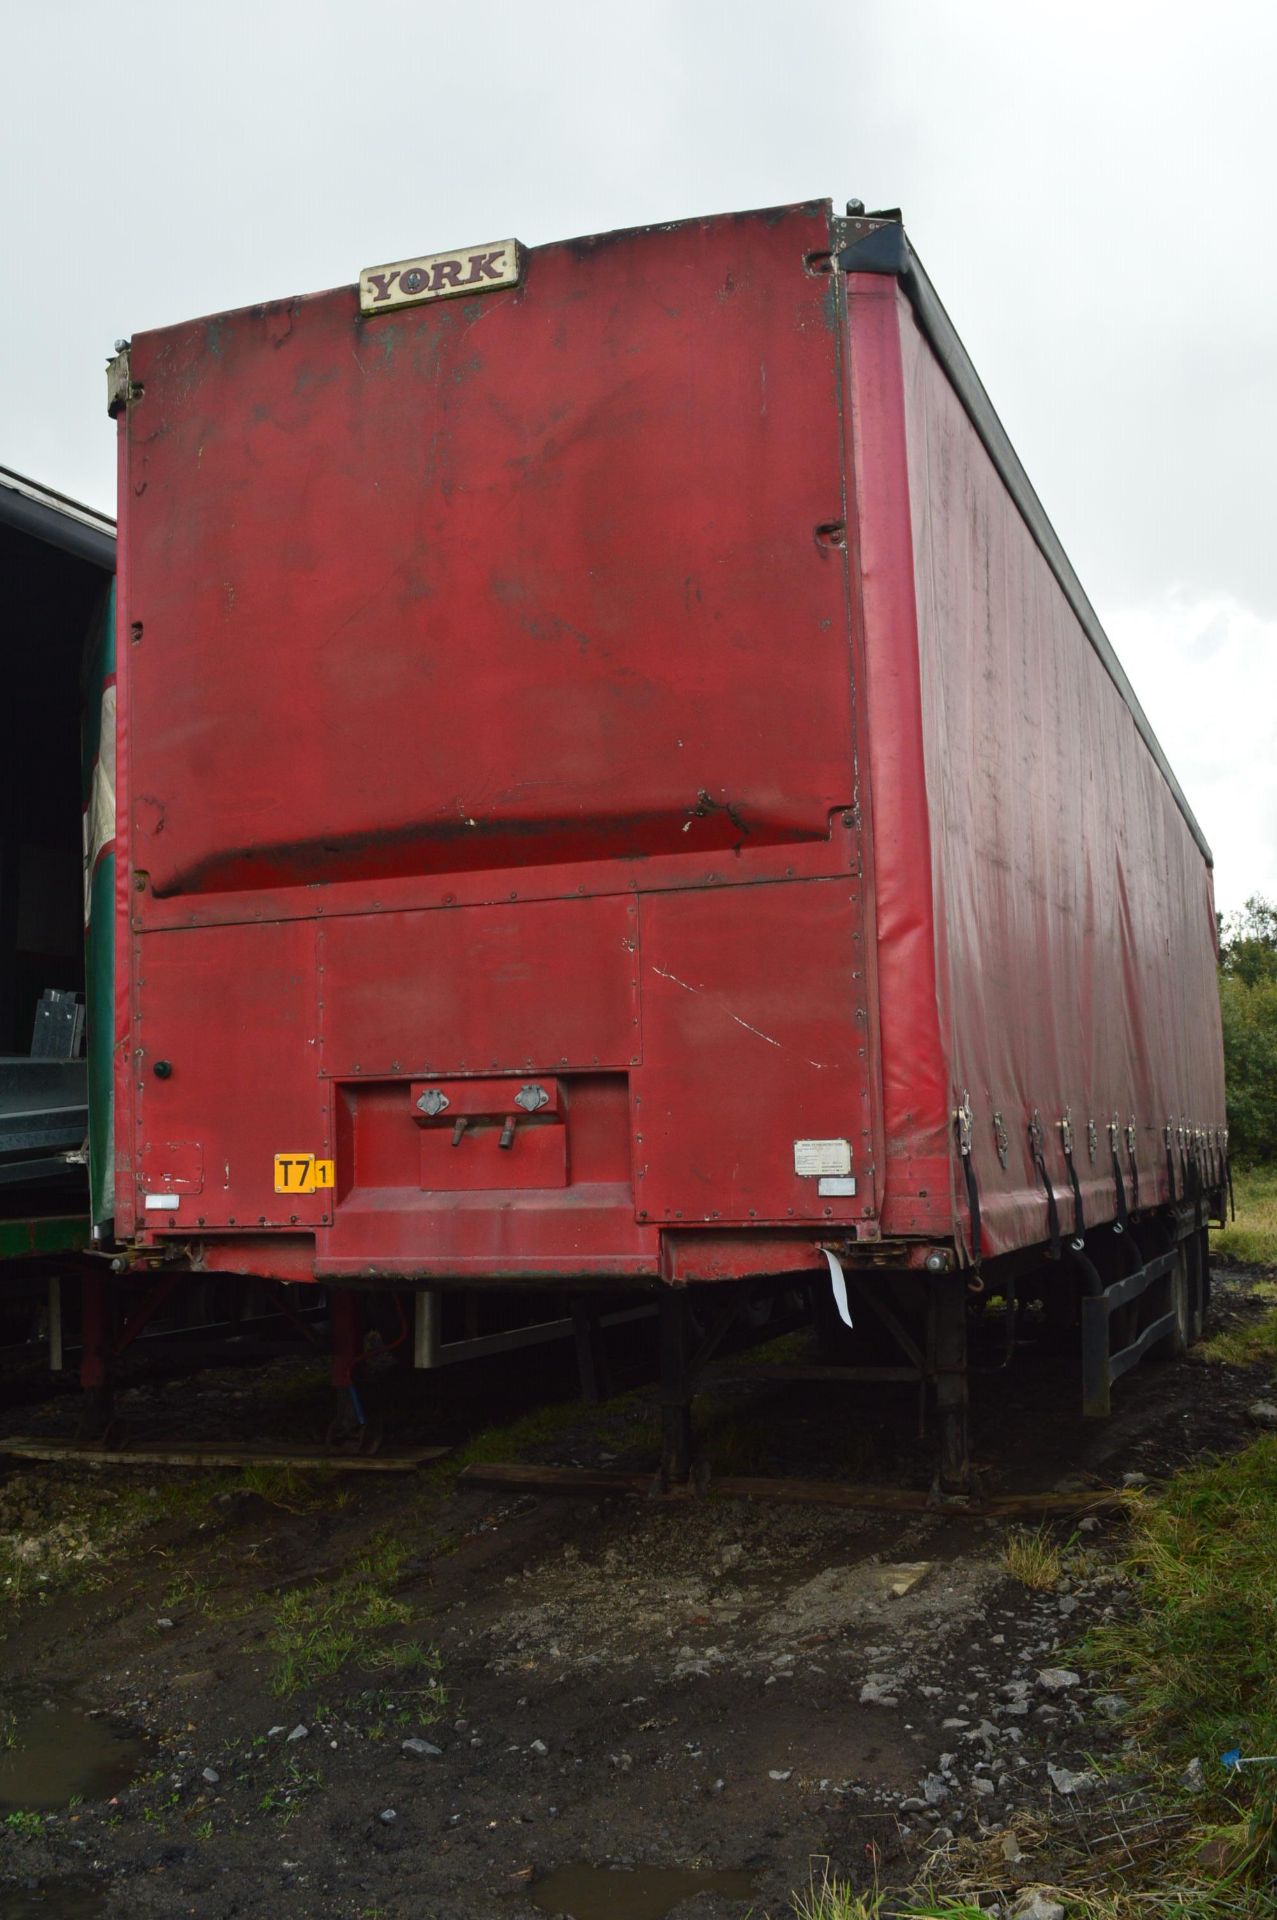 York Tandem Axle Curtainside Trailer, year of manufacture 1996, 31,500kg max. trailer weight (lot